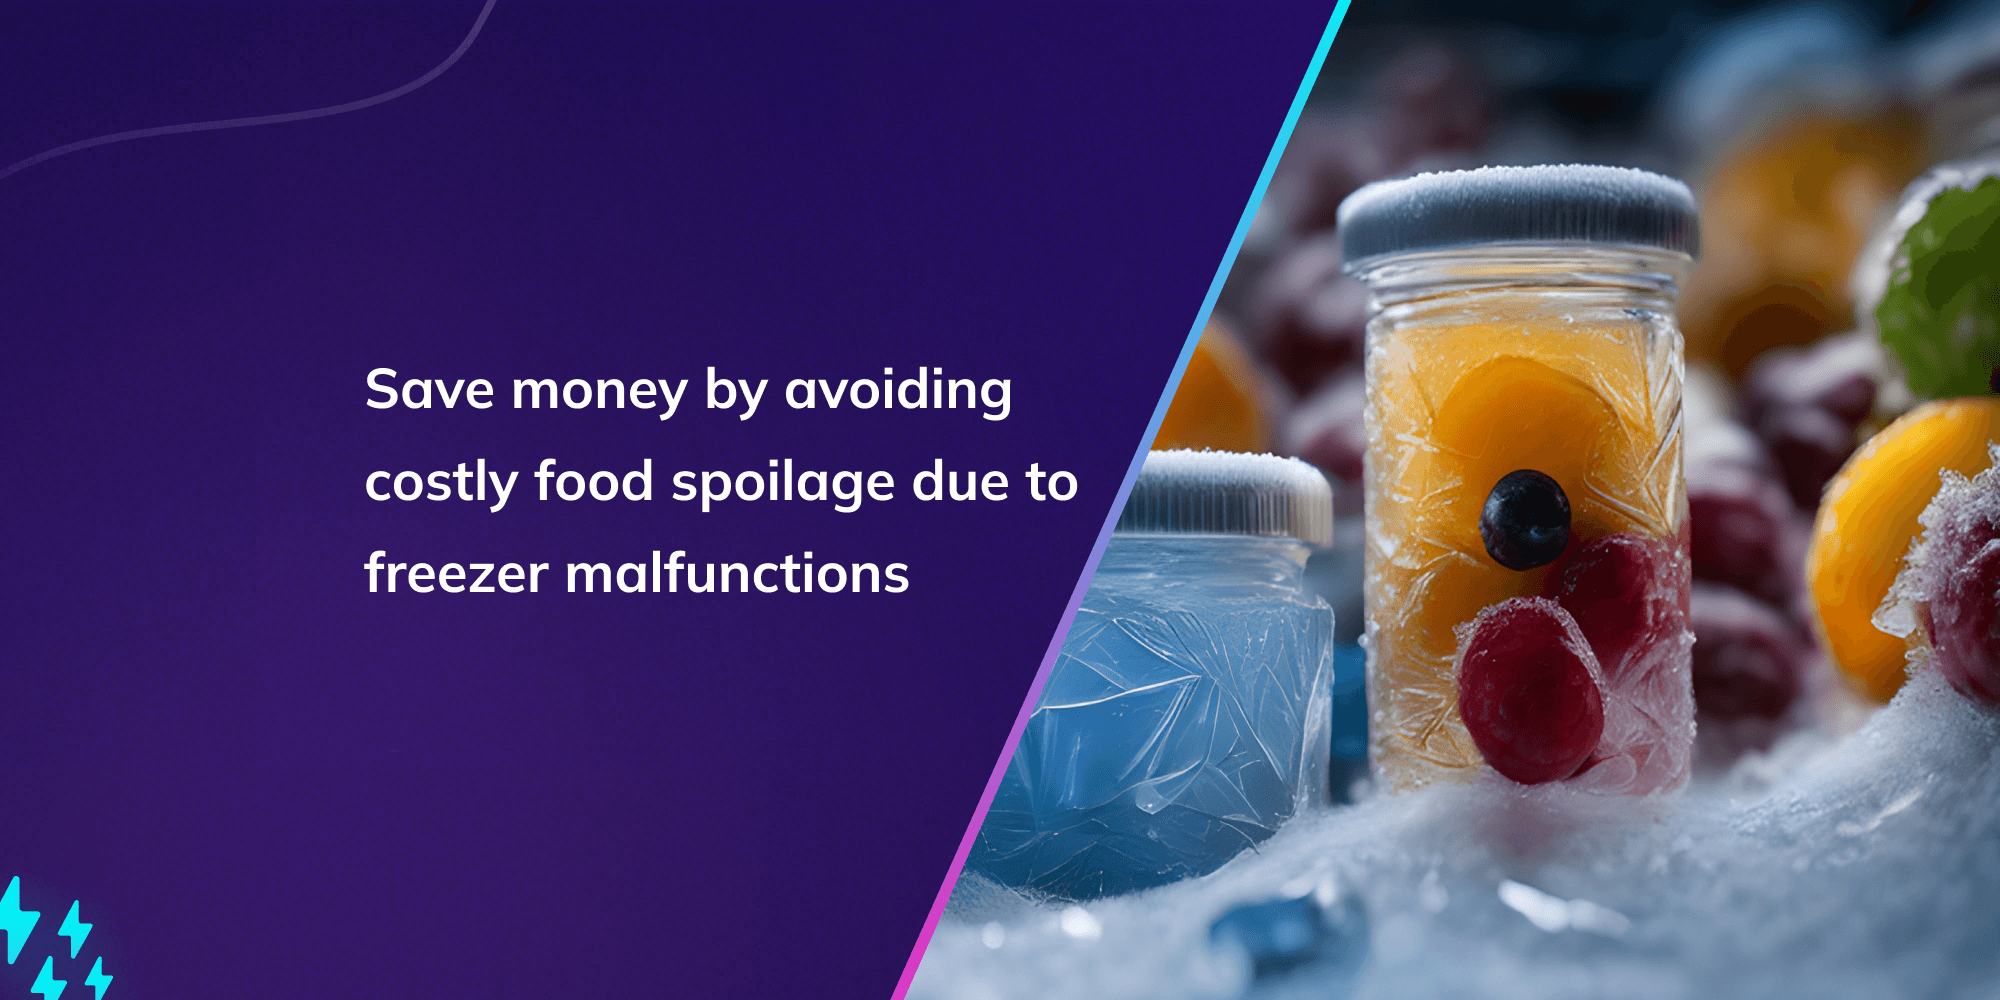 Save money by avoiding costly food spoilage due to freezer malfunctions